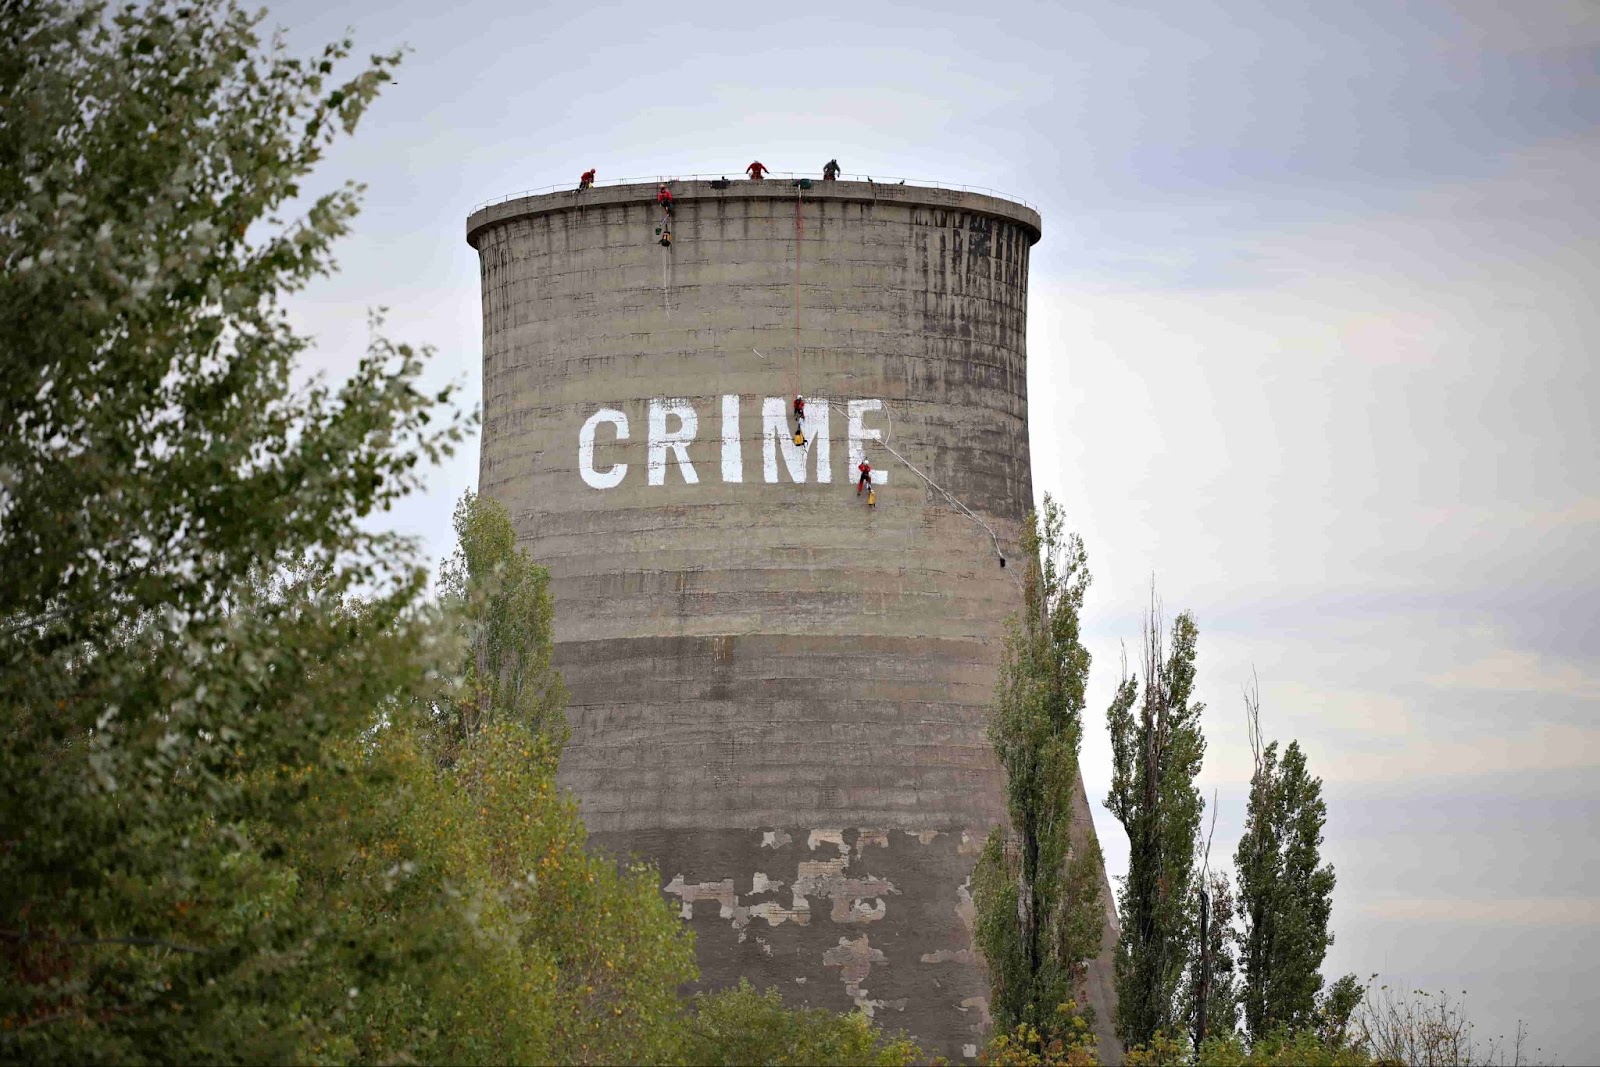 A giant power plant chimney has the word CRIME painted on it by activists using climbing gear